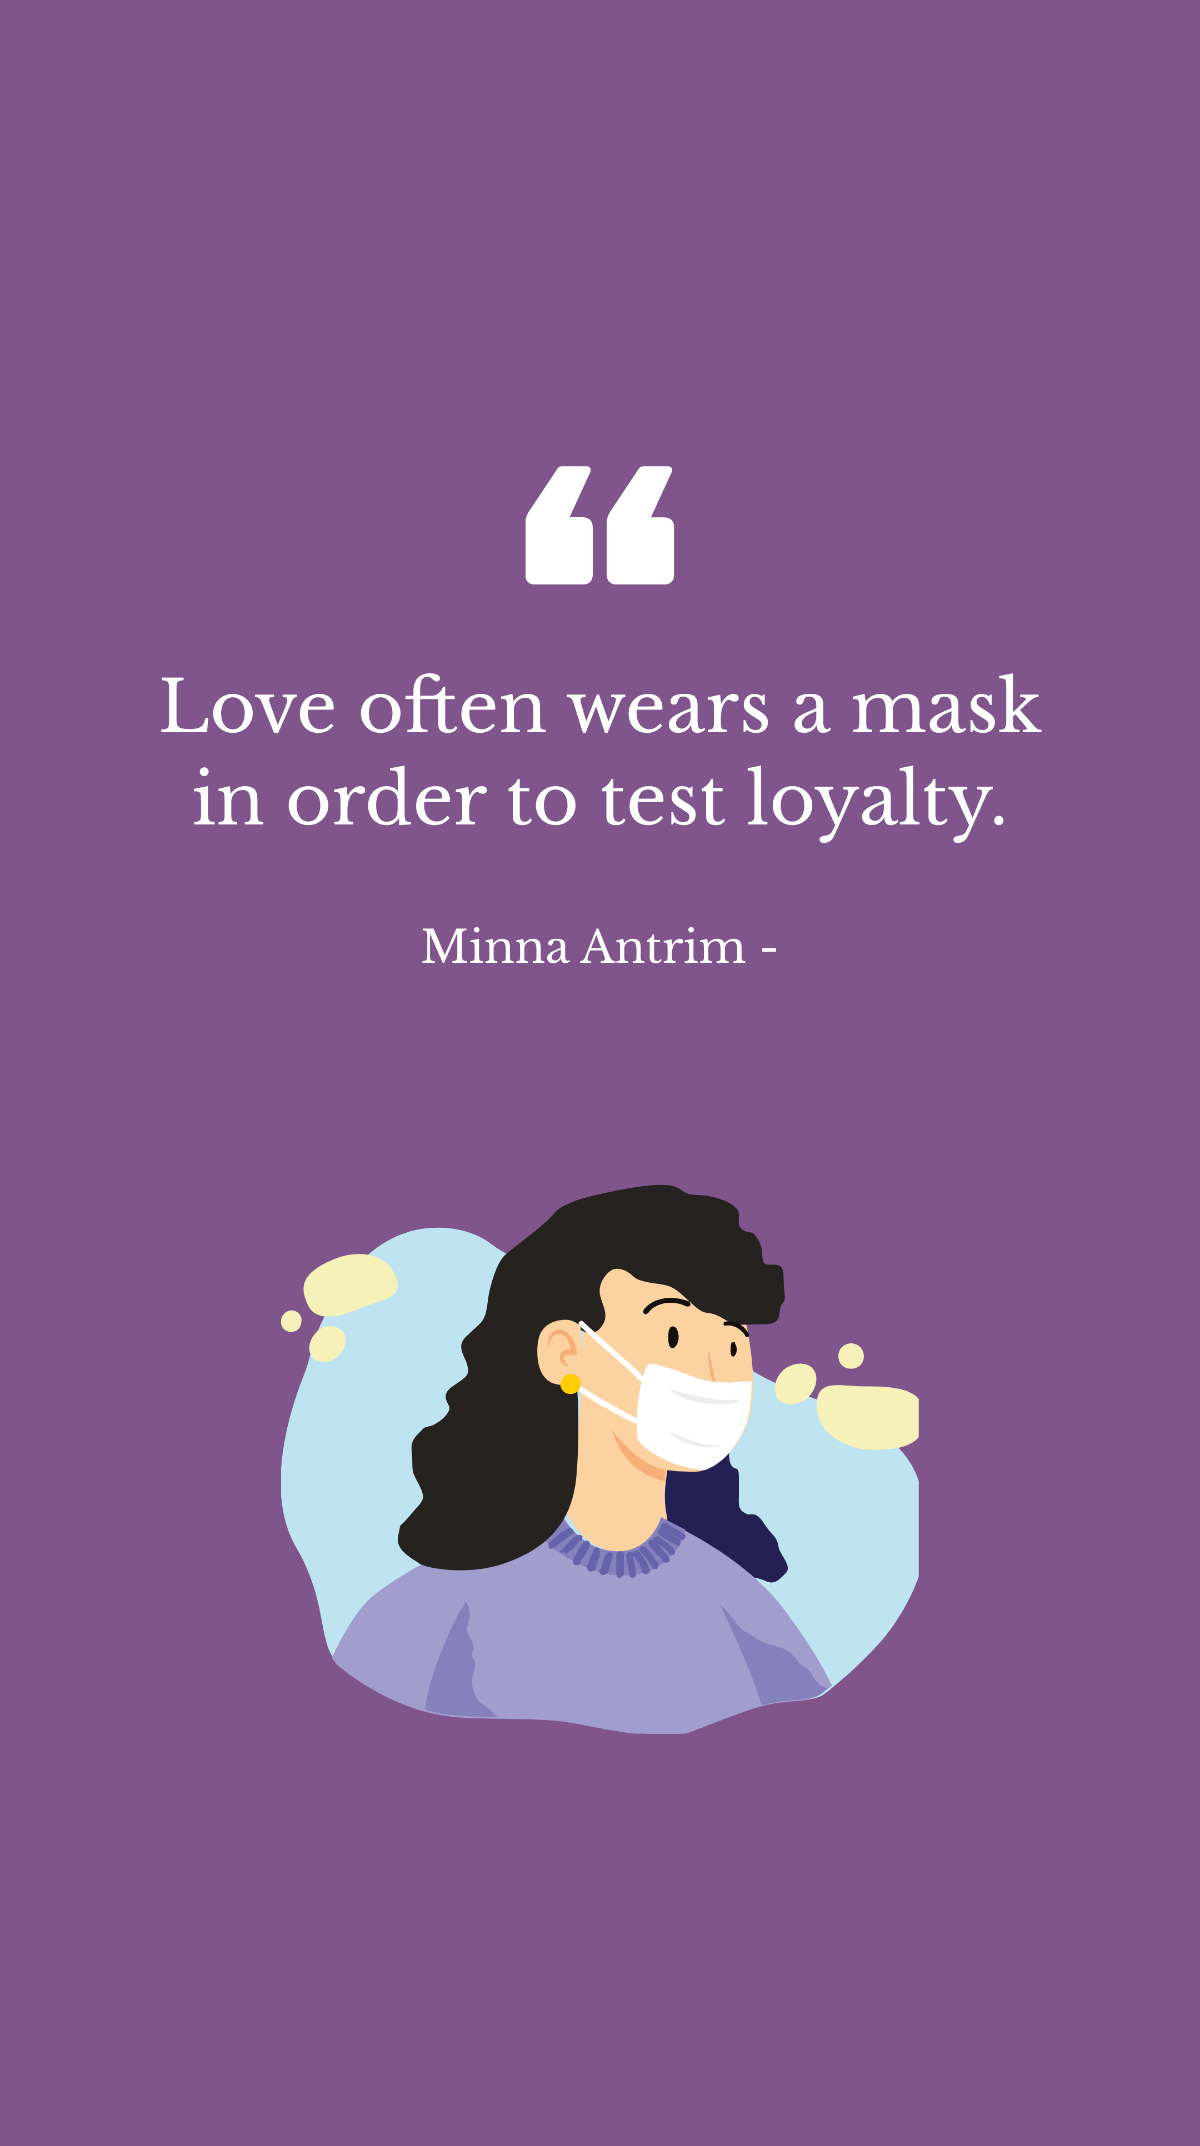 Minna Antrim - Love often wears a mask in order to test loyalty. Template